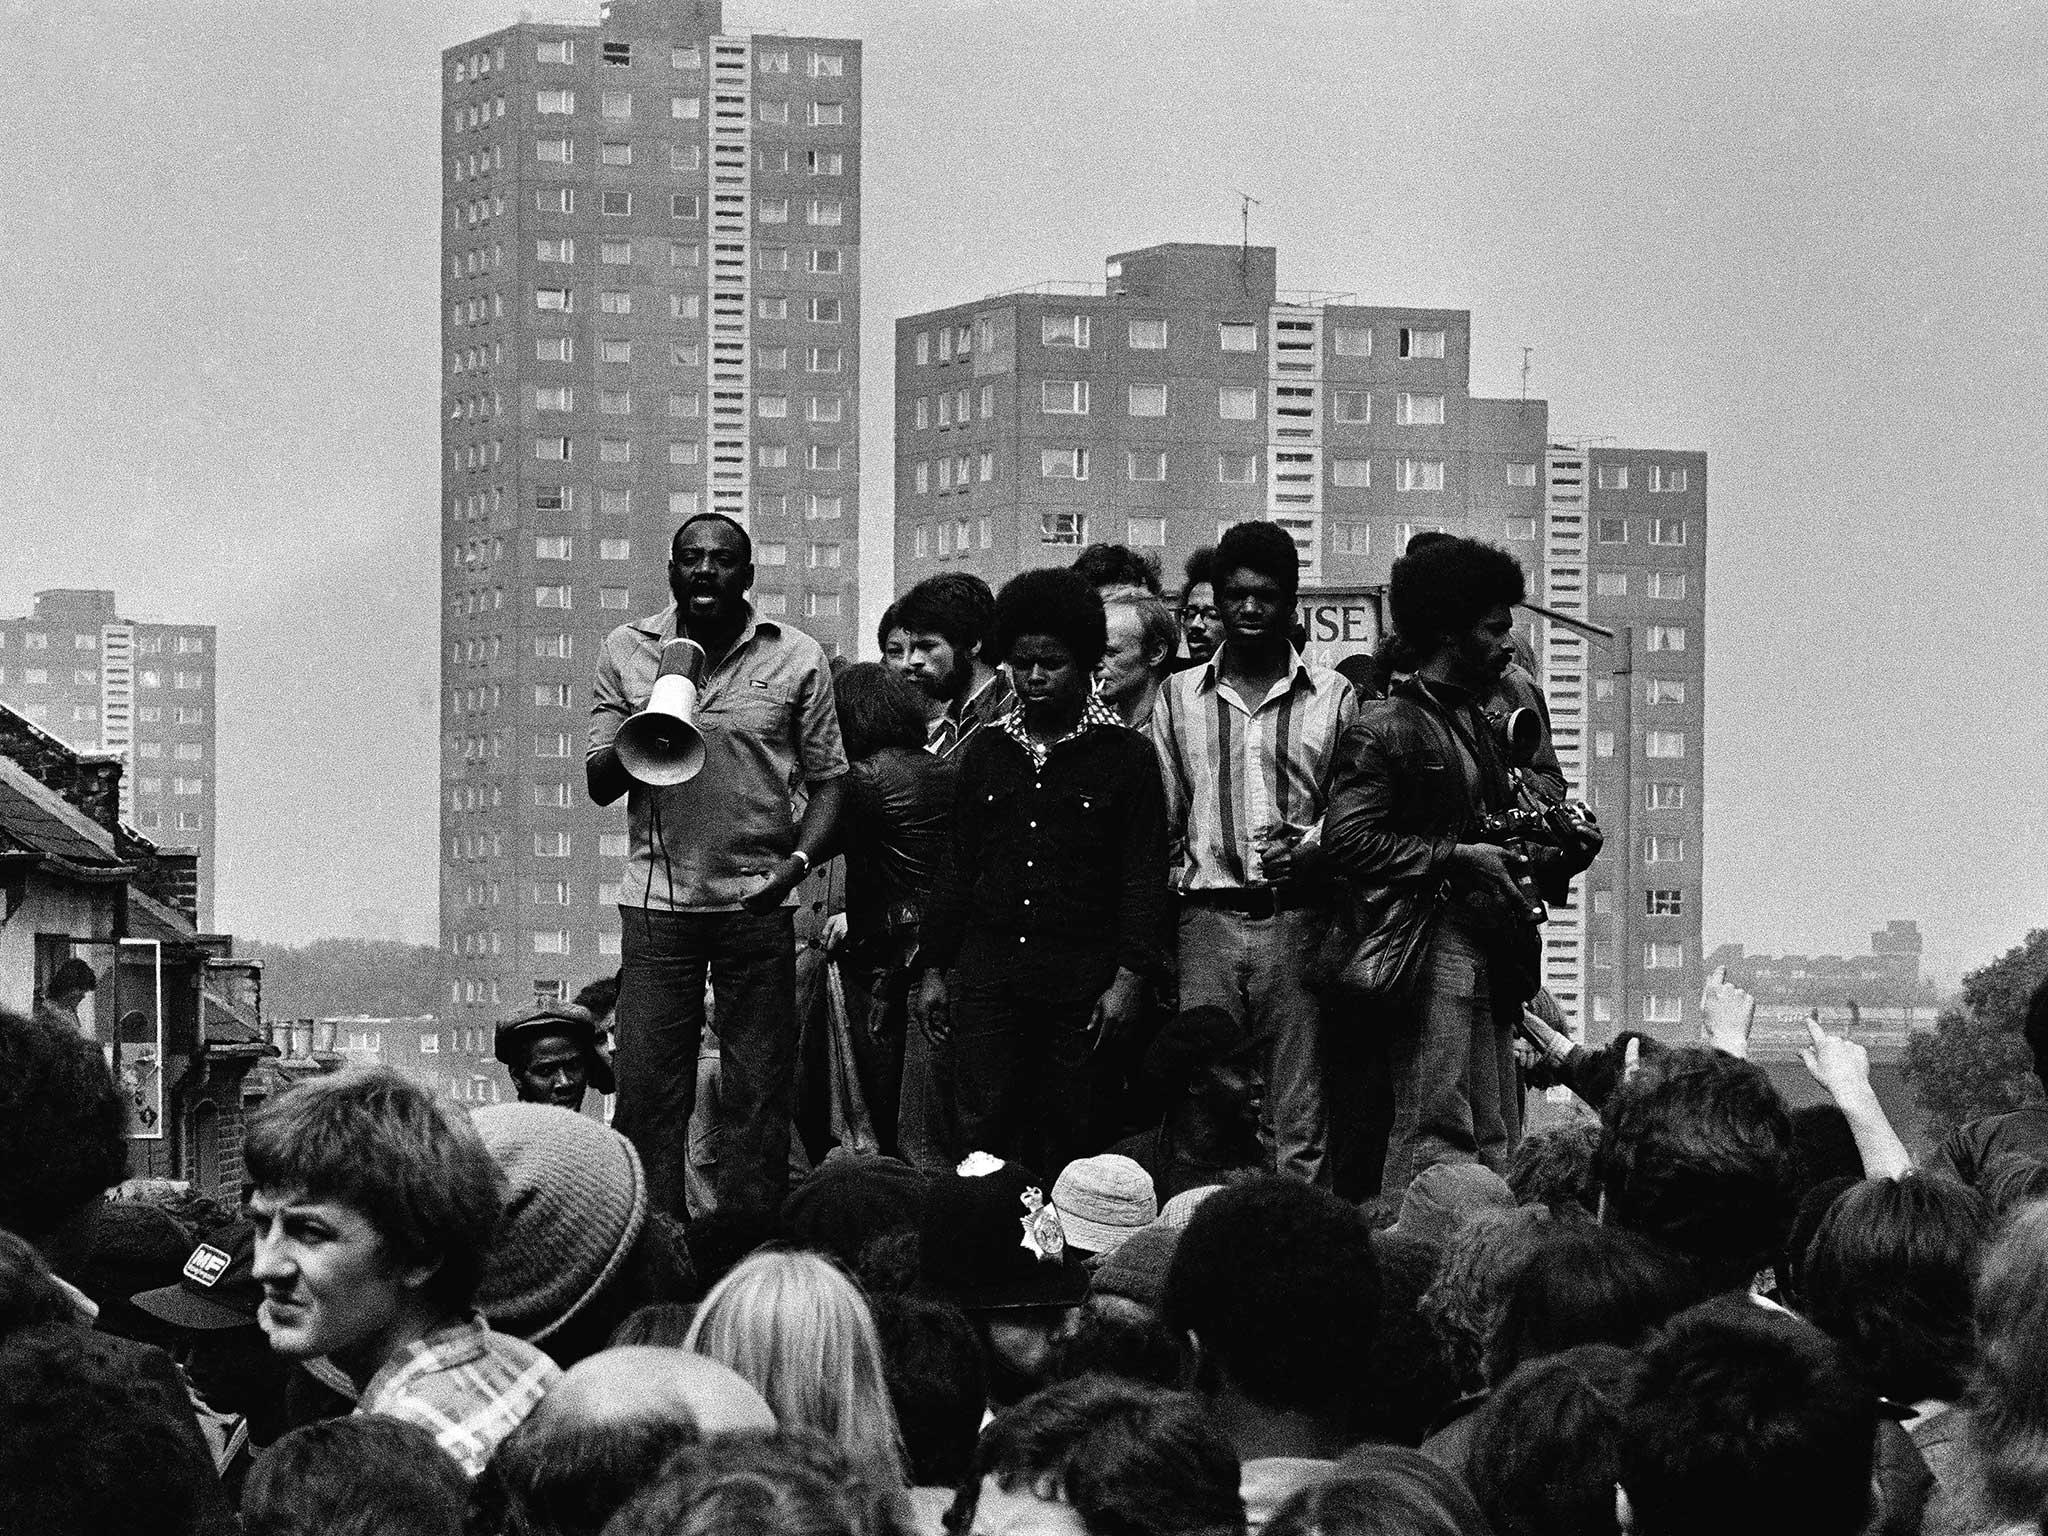 Civil liberties activist Darcus Howe addresses the 'Anti-Anti Mugging March' from the roof of a public toilet